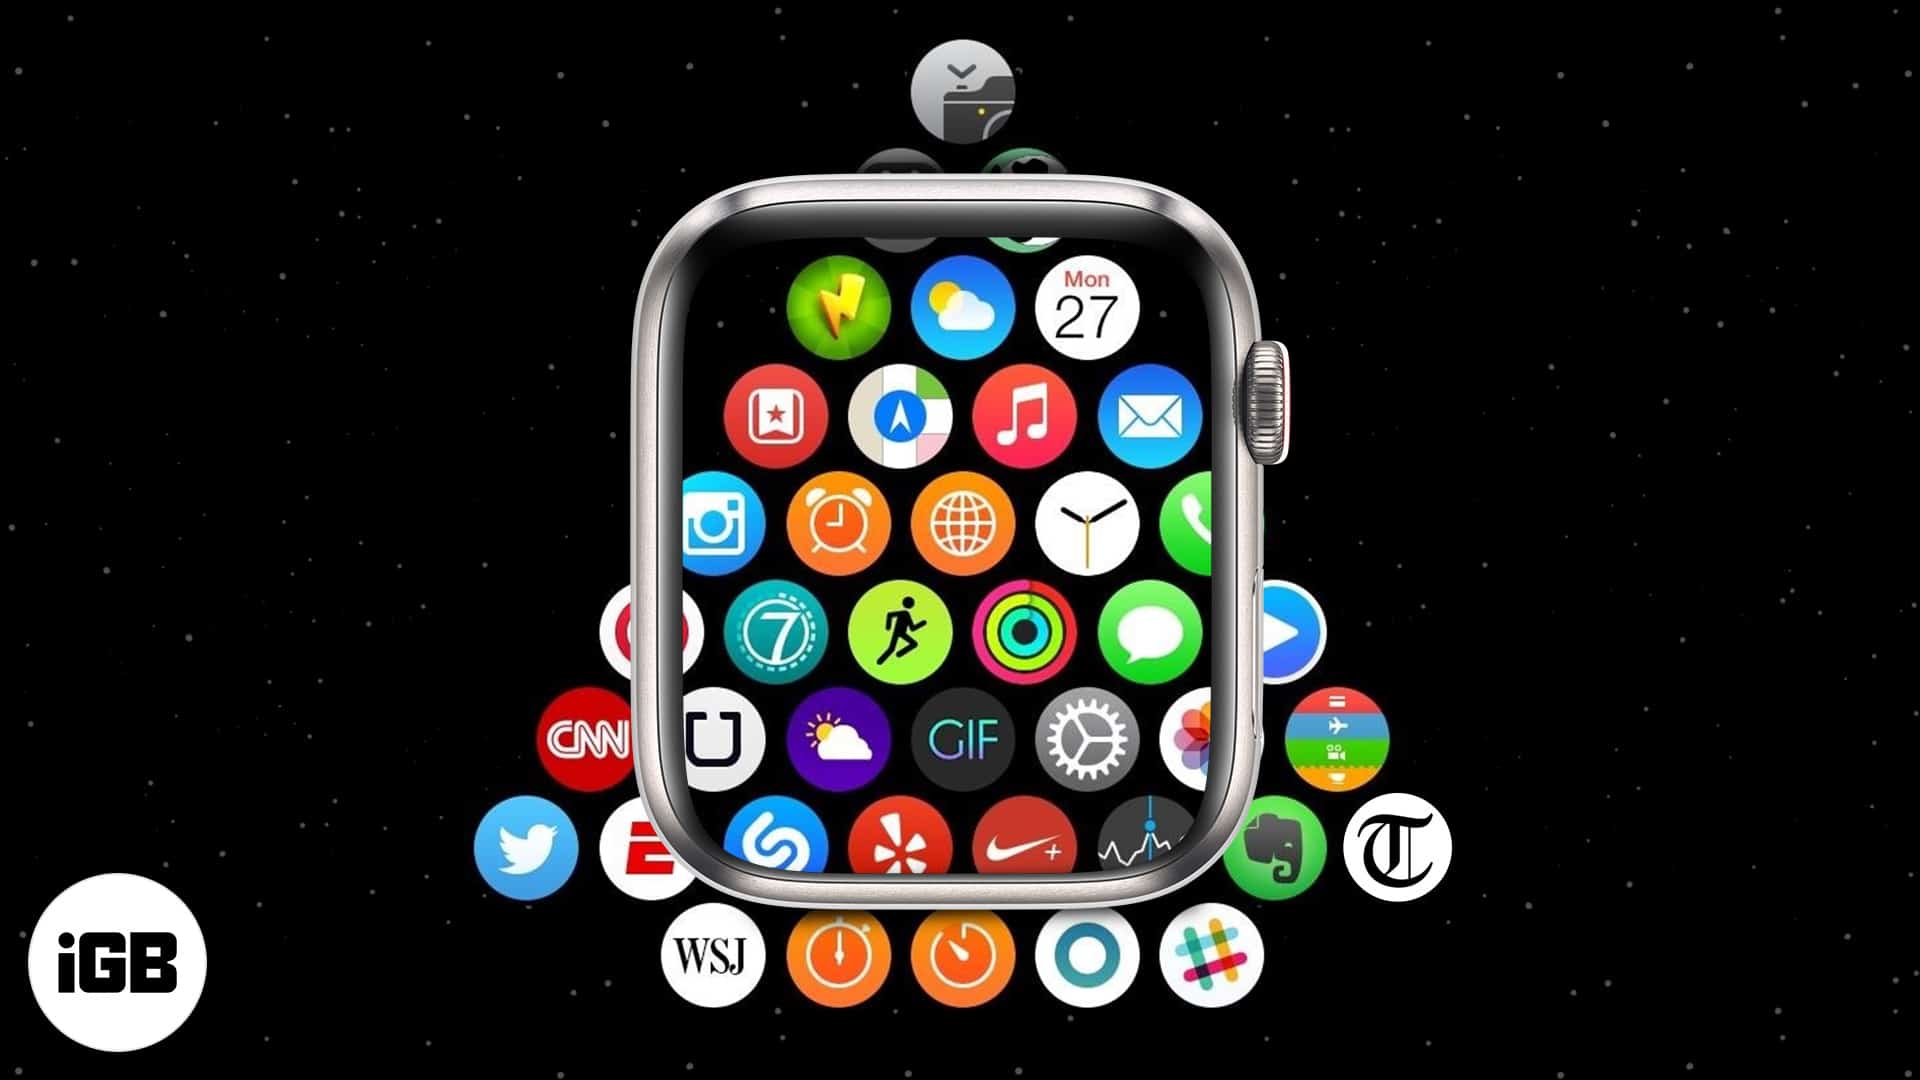 How to change Apple Watch App Layout